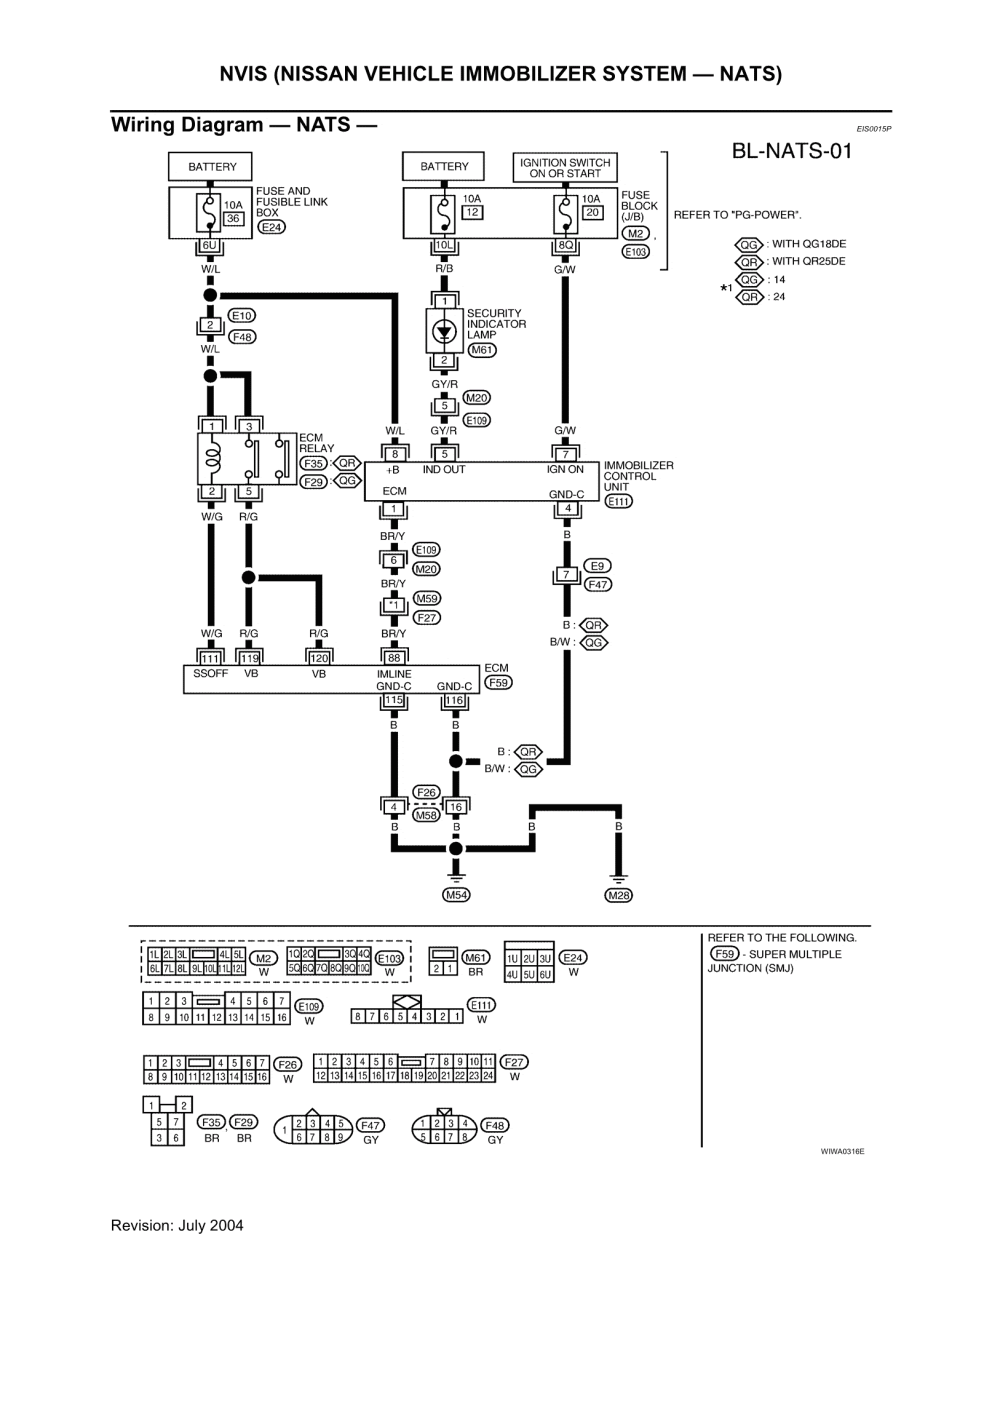 34 2005 Nissan Altima Stereo Wiring Diagram